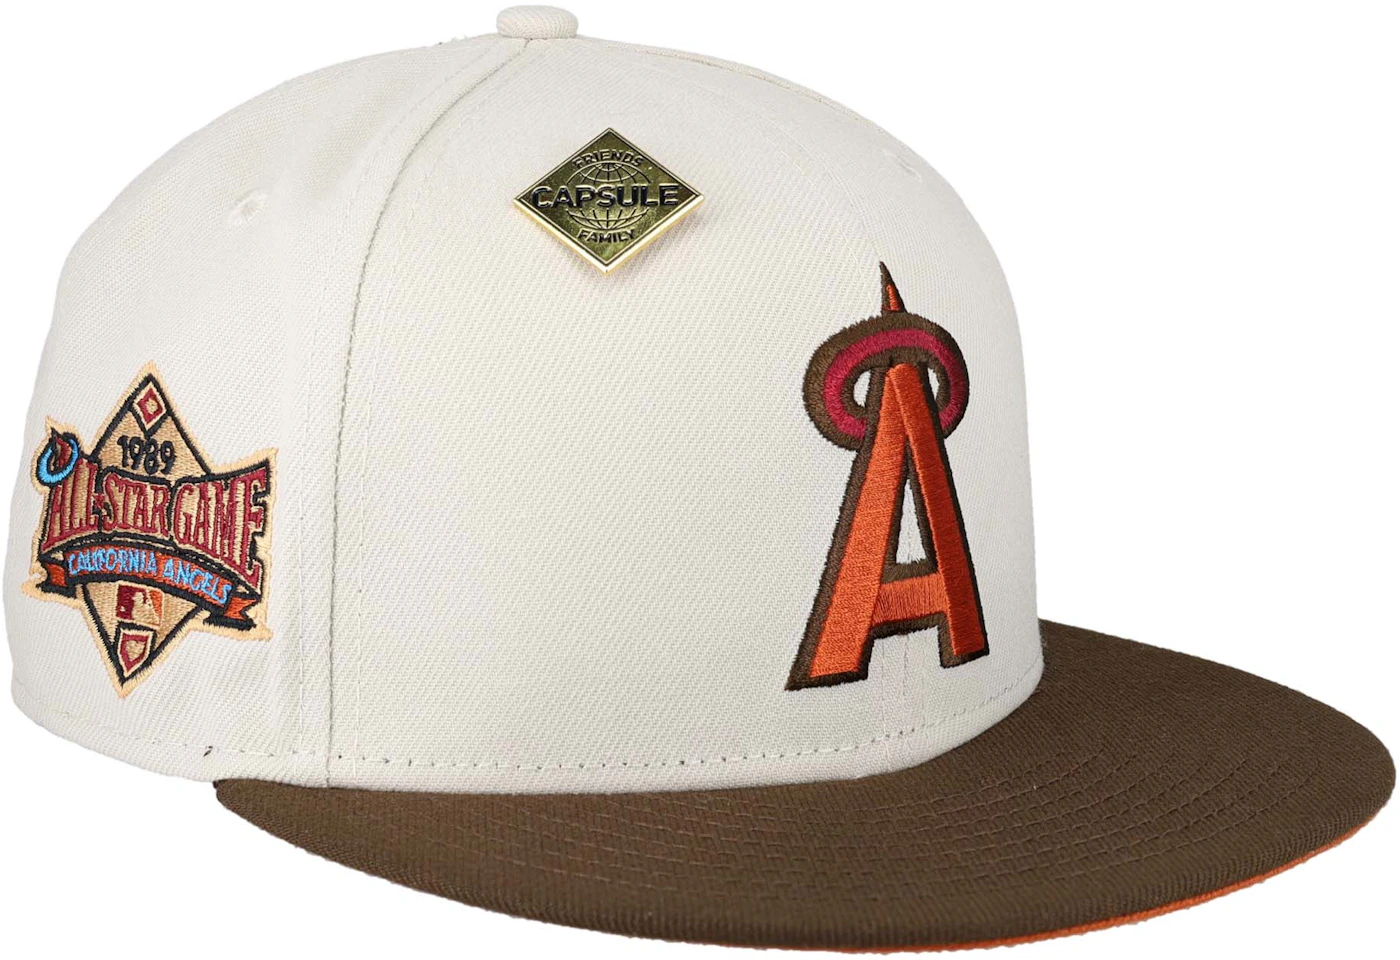 Anaheim Angels 50TH ANNIVERSARY New Era 59Fifty FItted Hat 90s